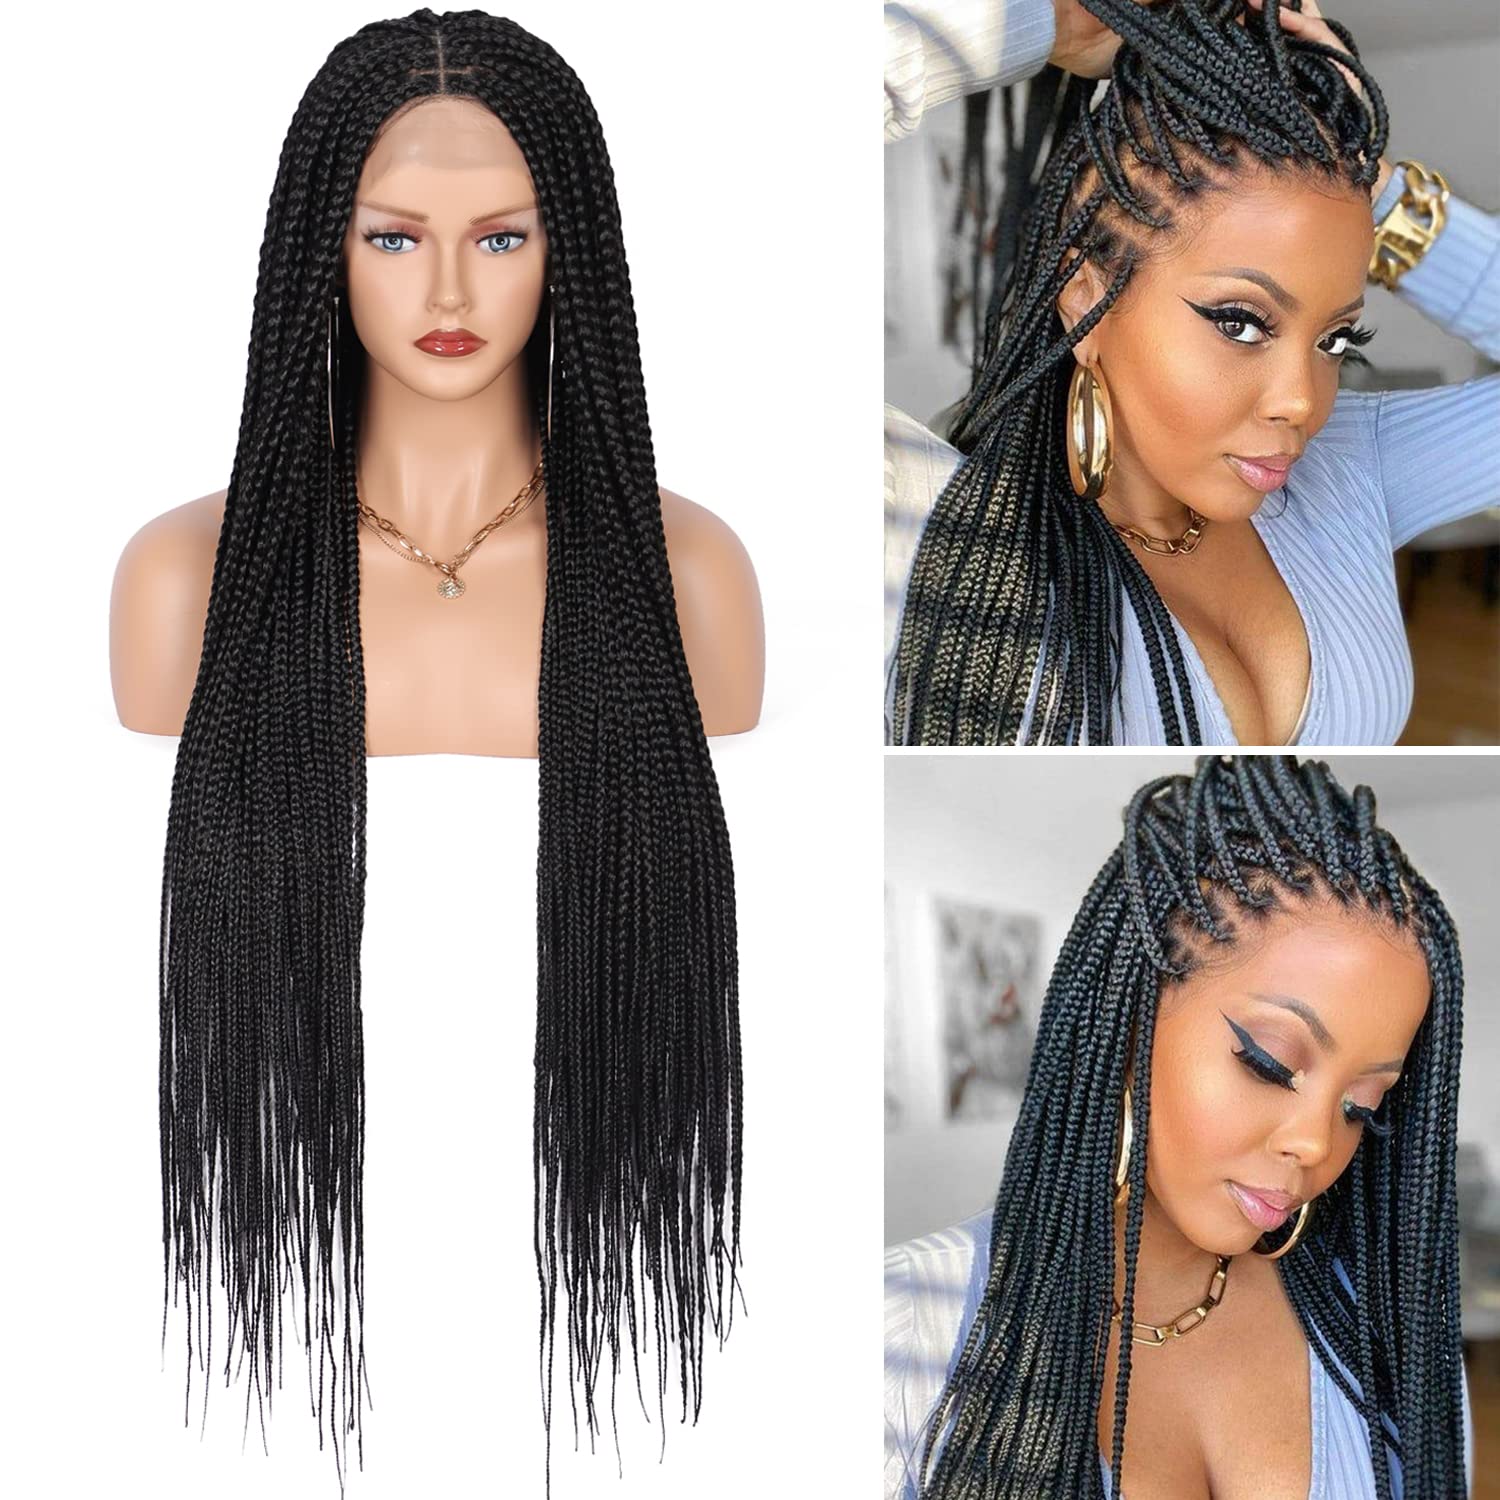 Knotless Braids, Full Lace Wig, Synthetic Hair, Braided Wig For Black Women